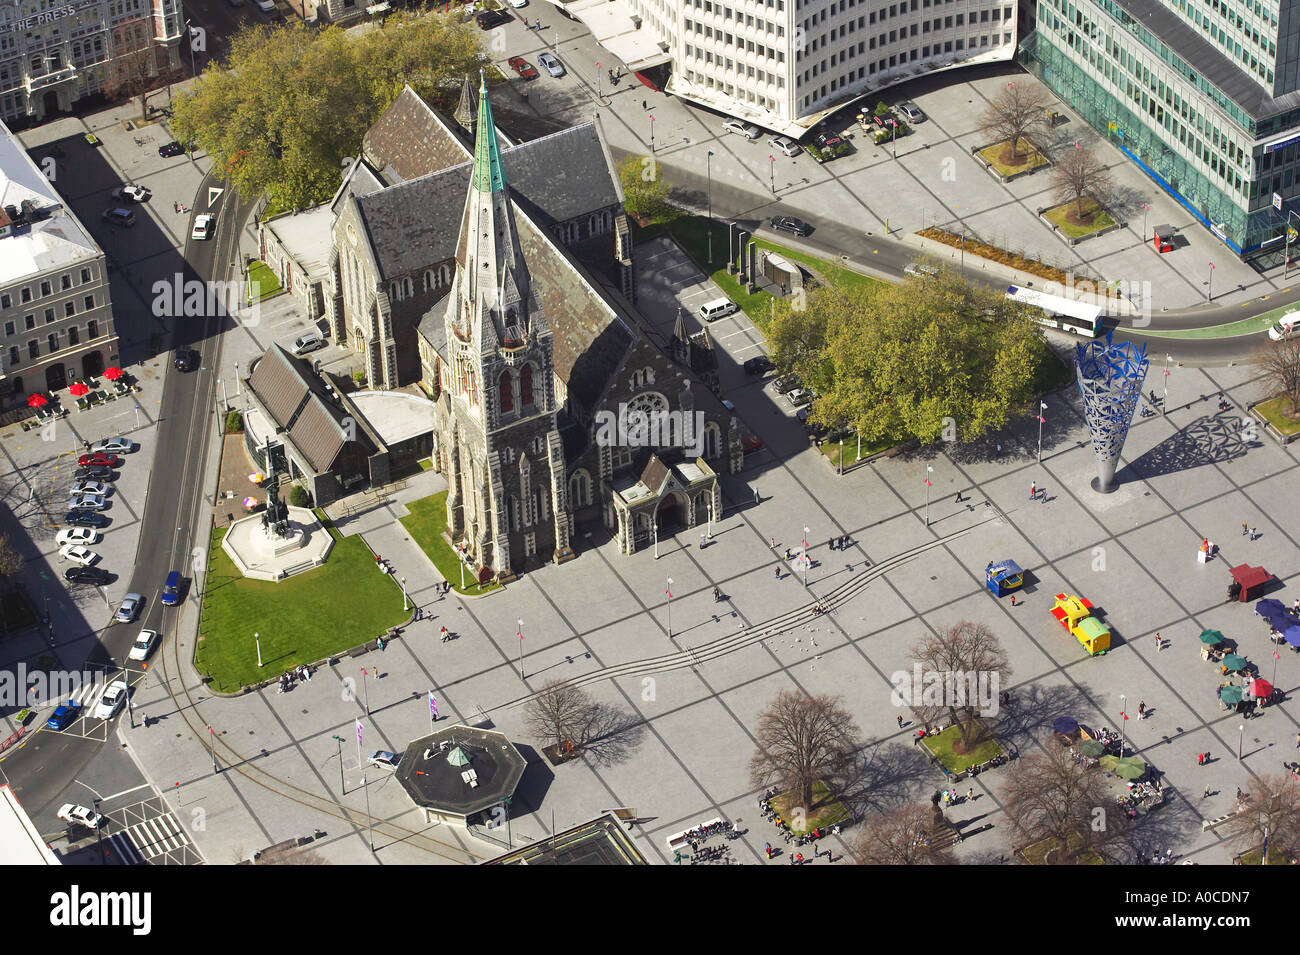 Cathedral Church of Christ, Cathedral Square, Christchurch, Canterbury, New Zealand aerial - before February 22, 2011 earthquake Stock Photo